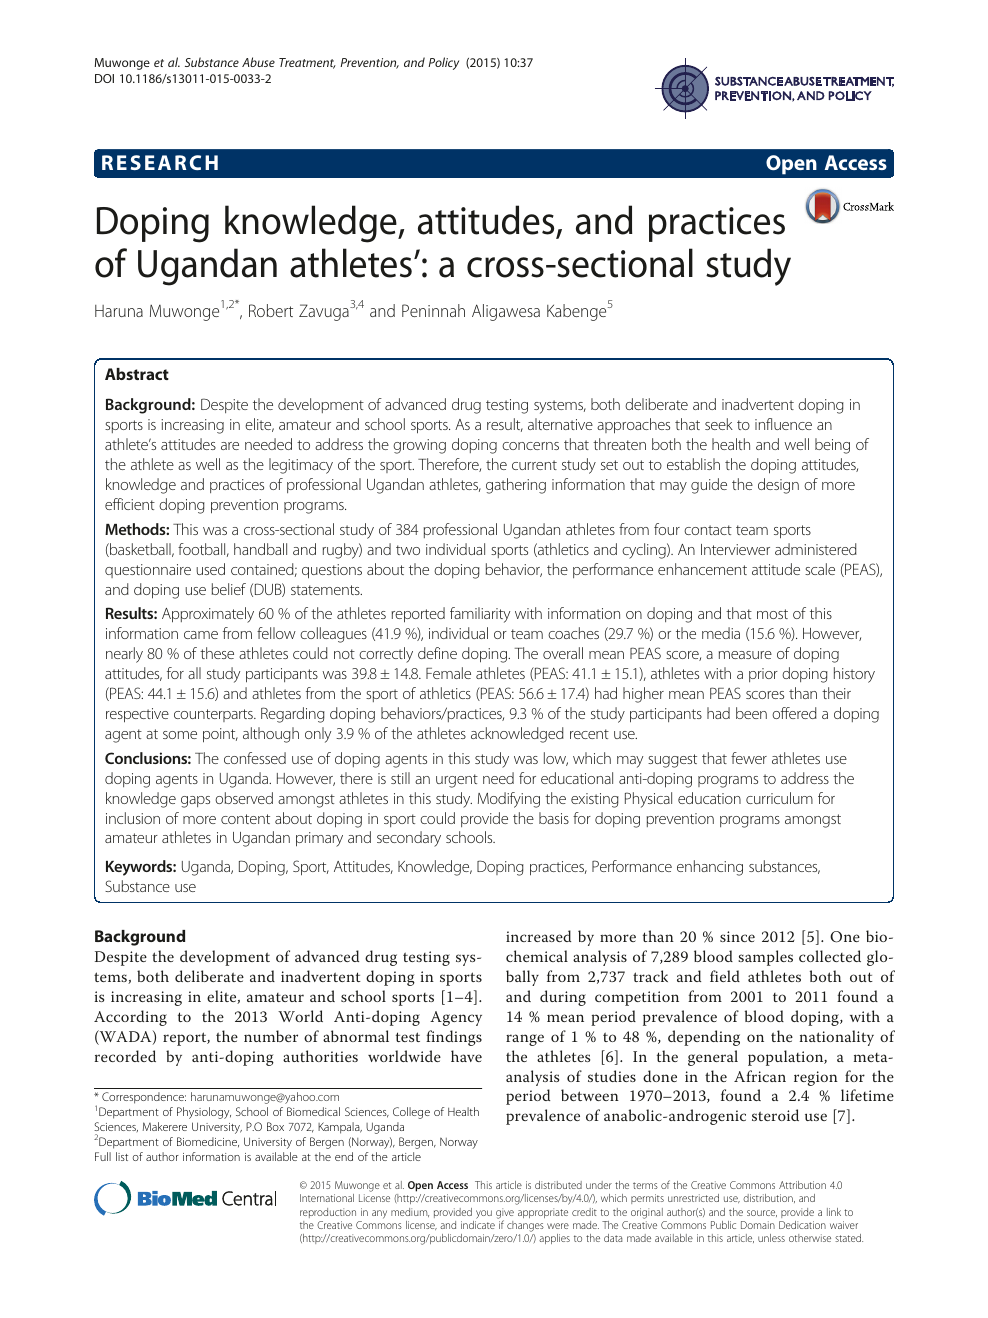 Doping knowledge, attitudes, and practices of Ugandan athletes a cross-sectional study picture photo